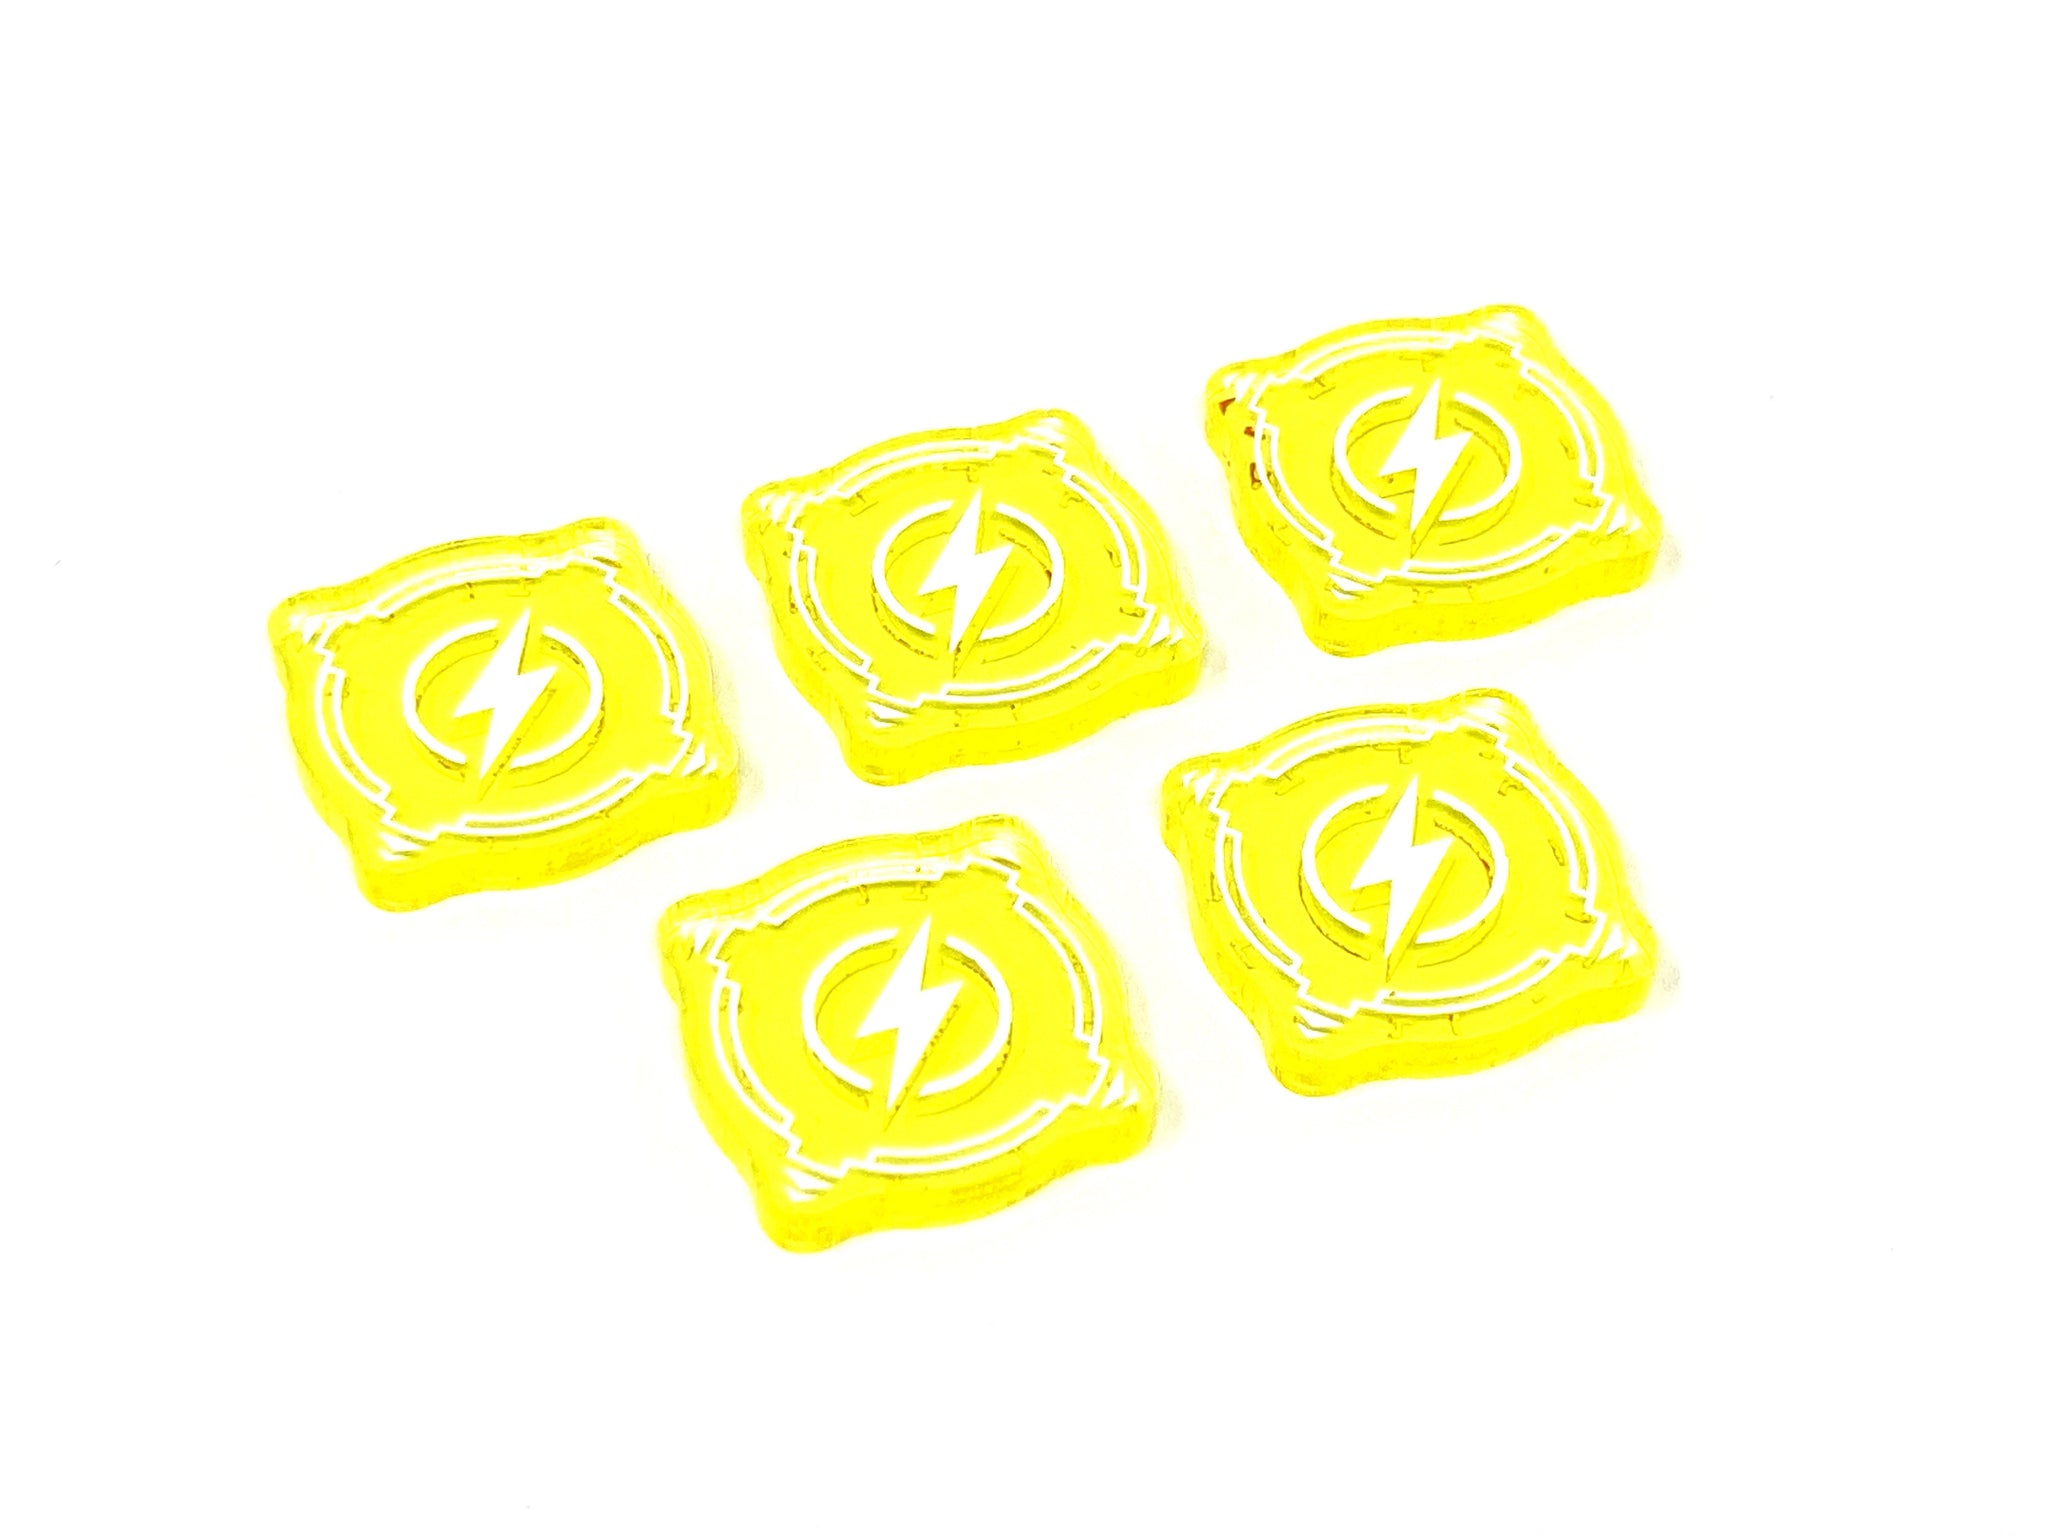 5 x Charge Tokens - Translucent Series (Double Sided)